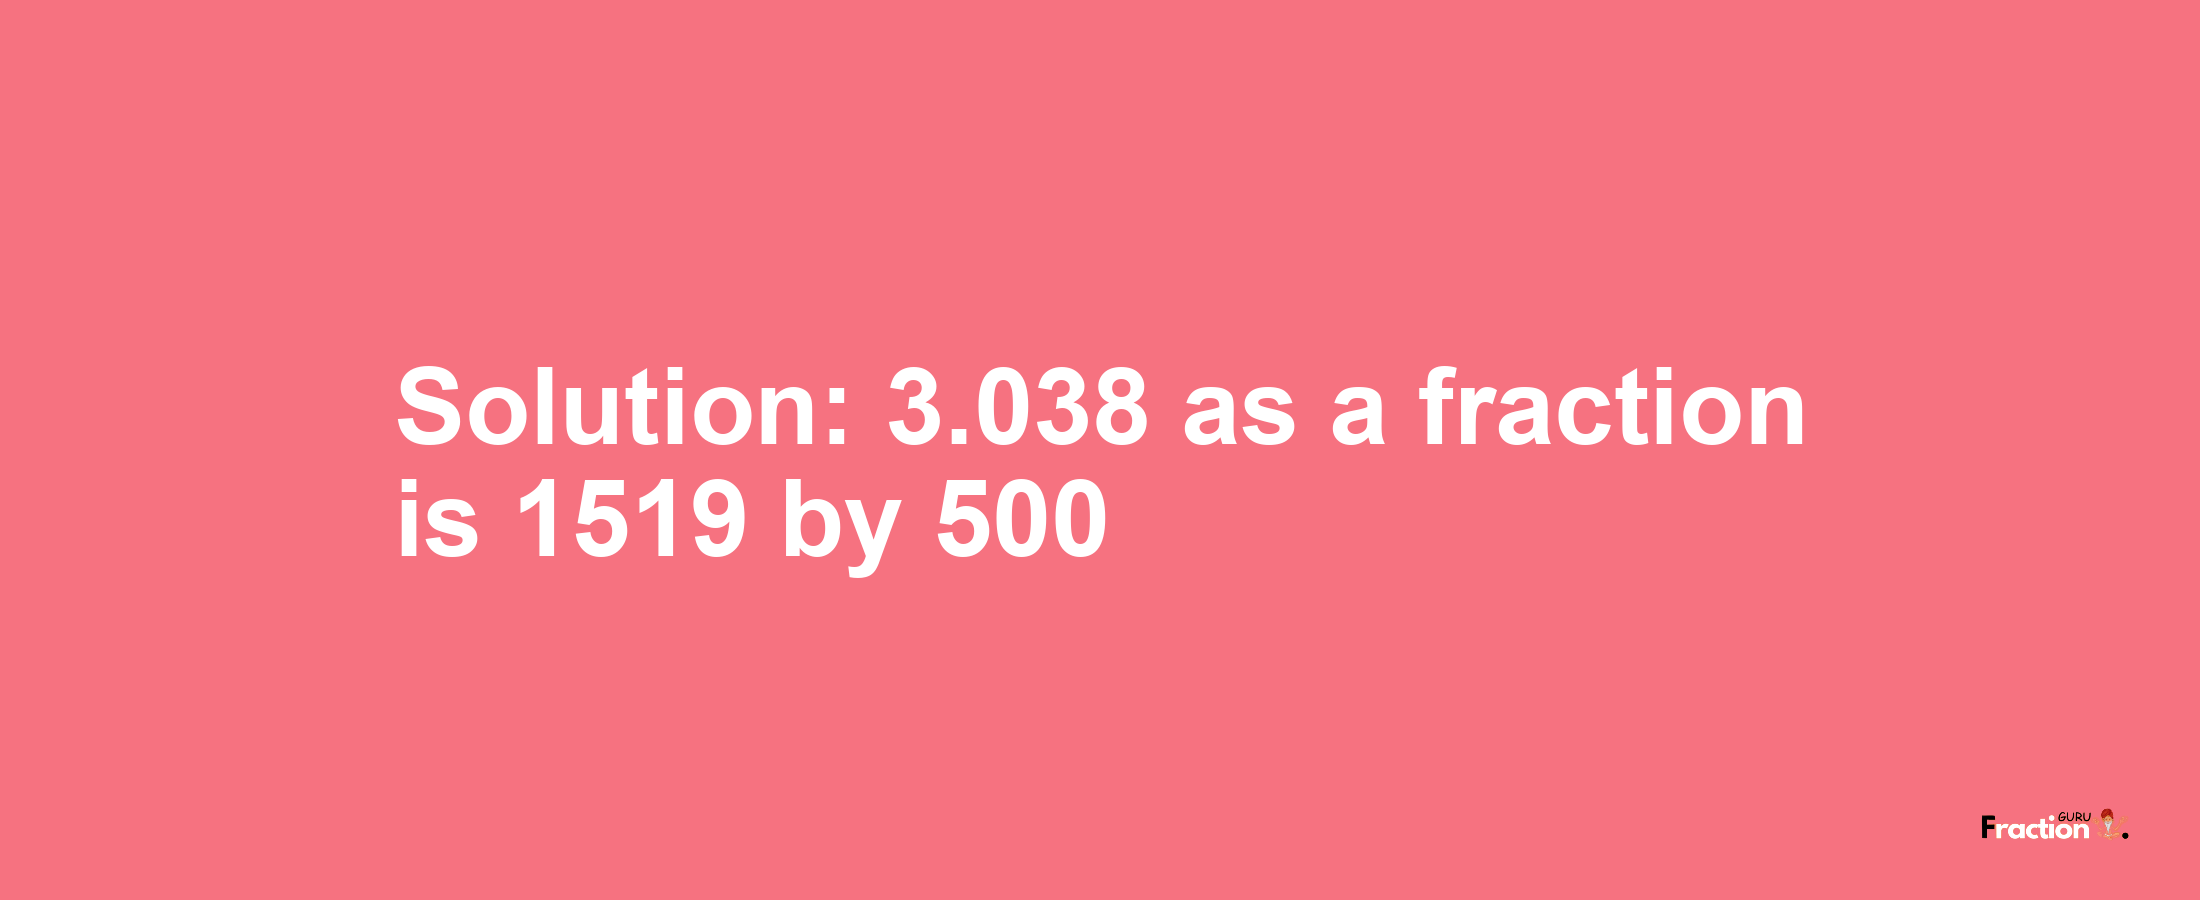 Solution:3.038 as a fraction is 1519/500